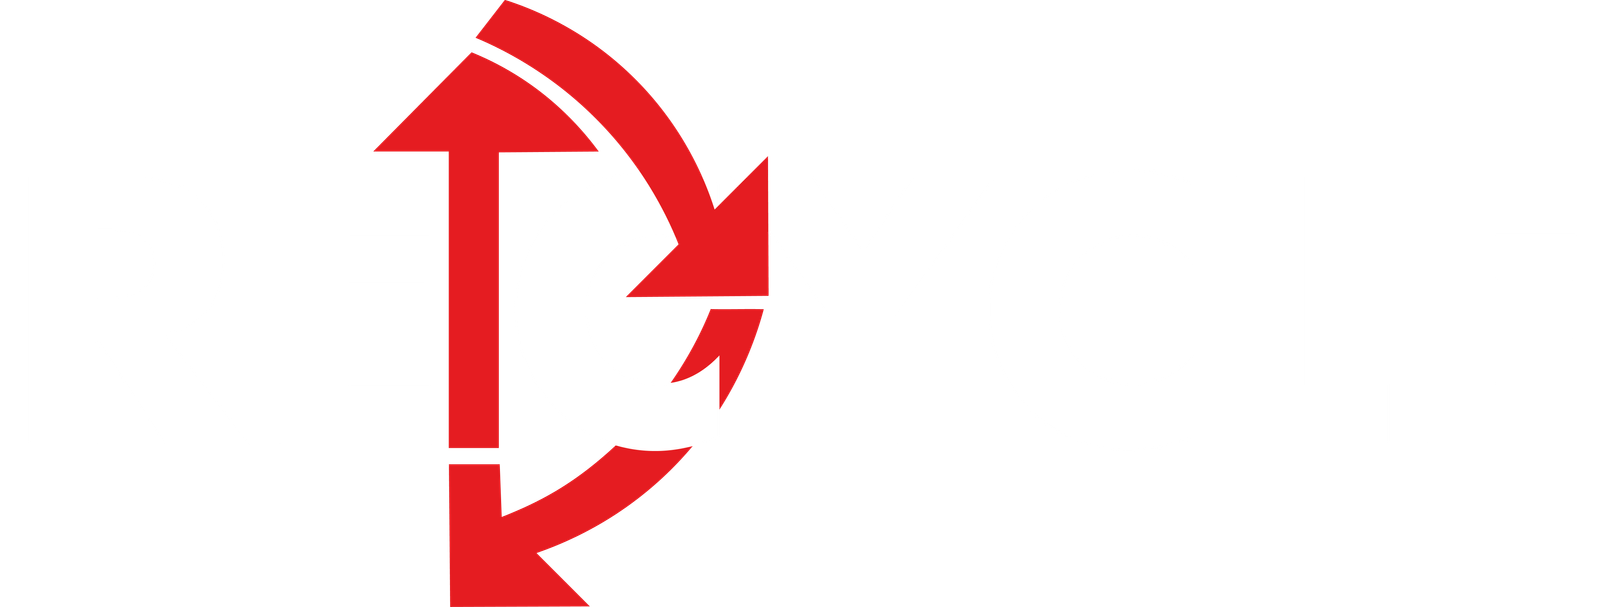 REDCYCLE